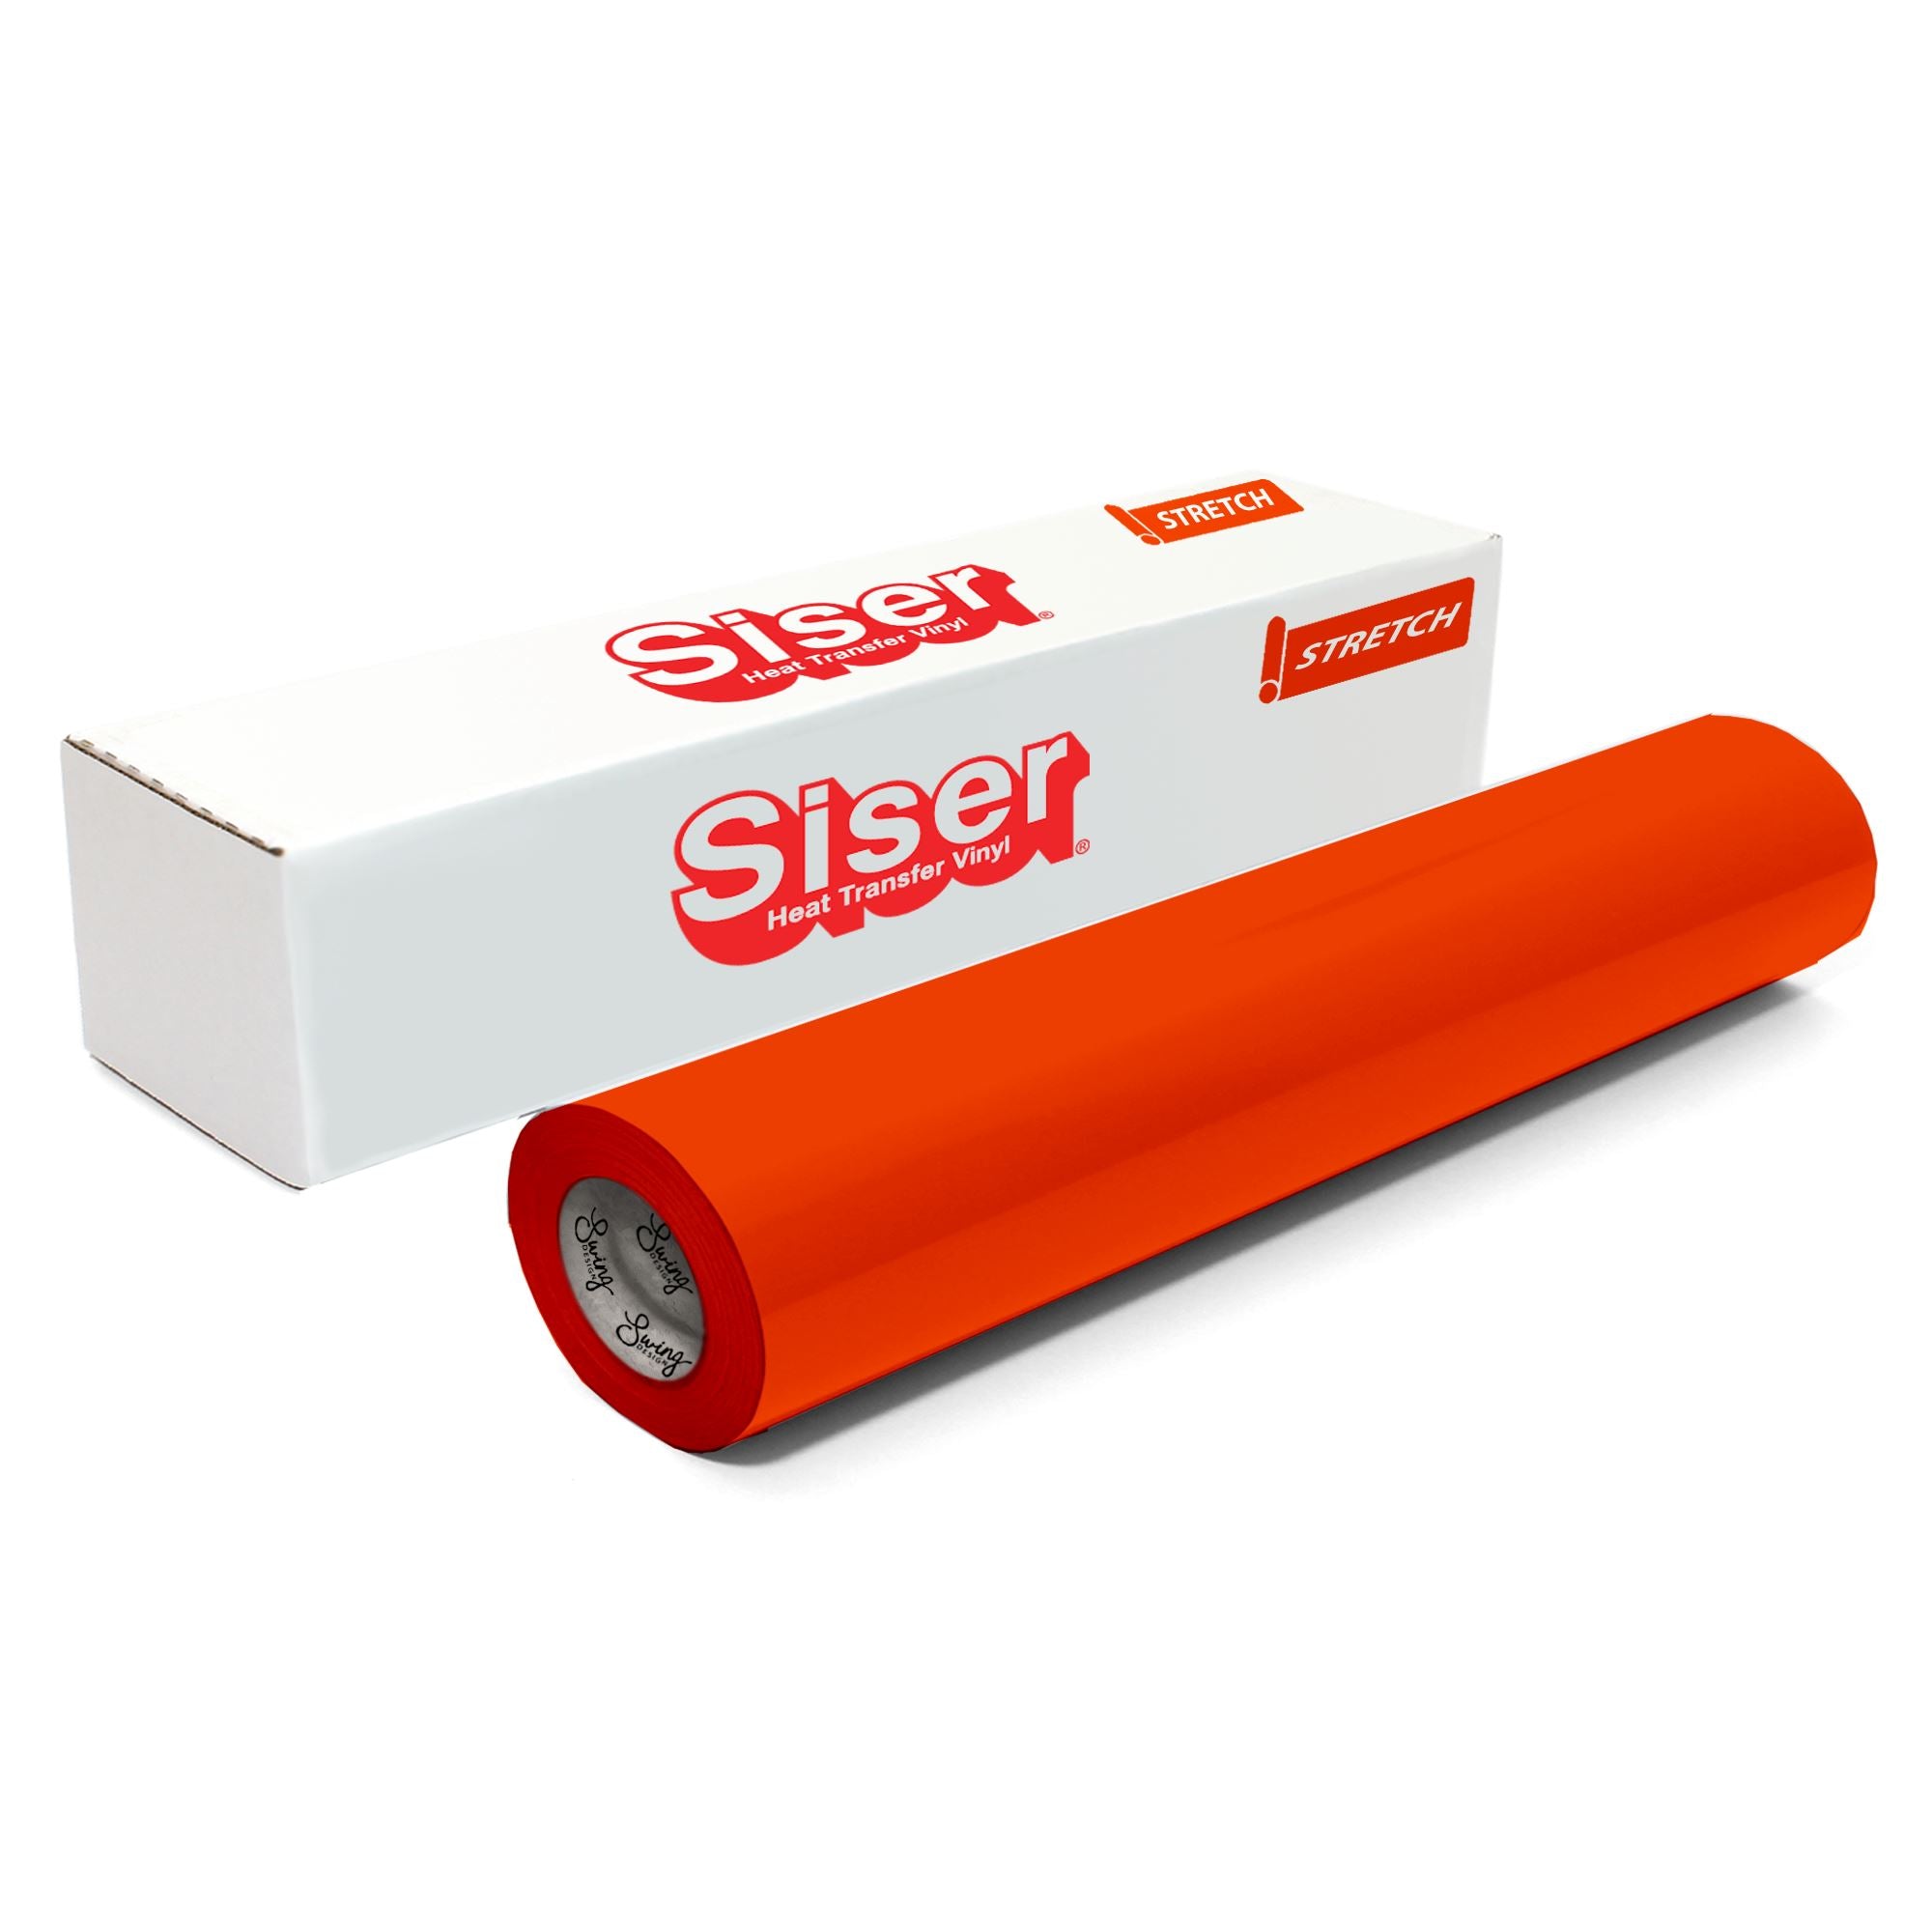 Fast delivery of 1 roll of 12 x10 '/ 30cmx300cm vinyl heat